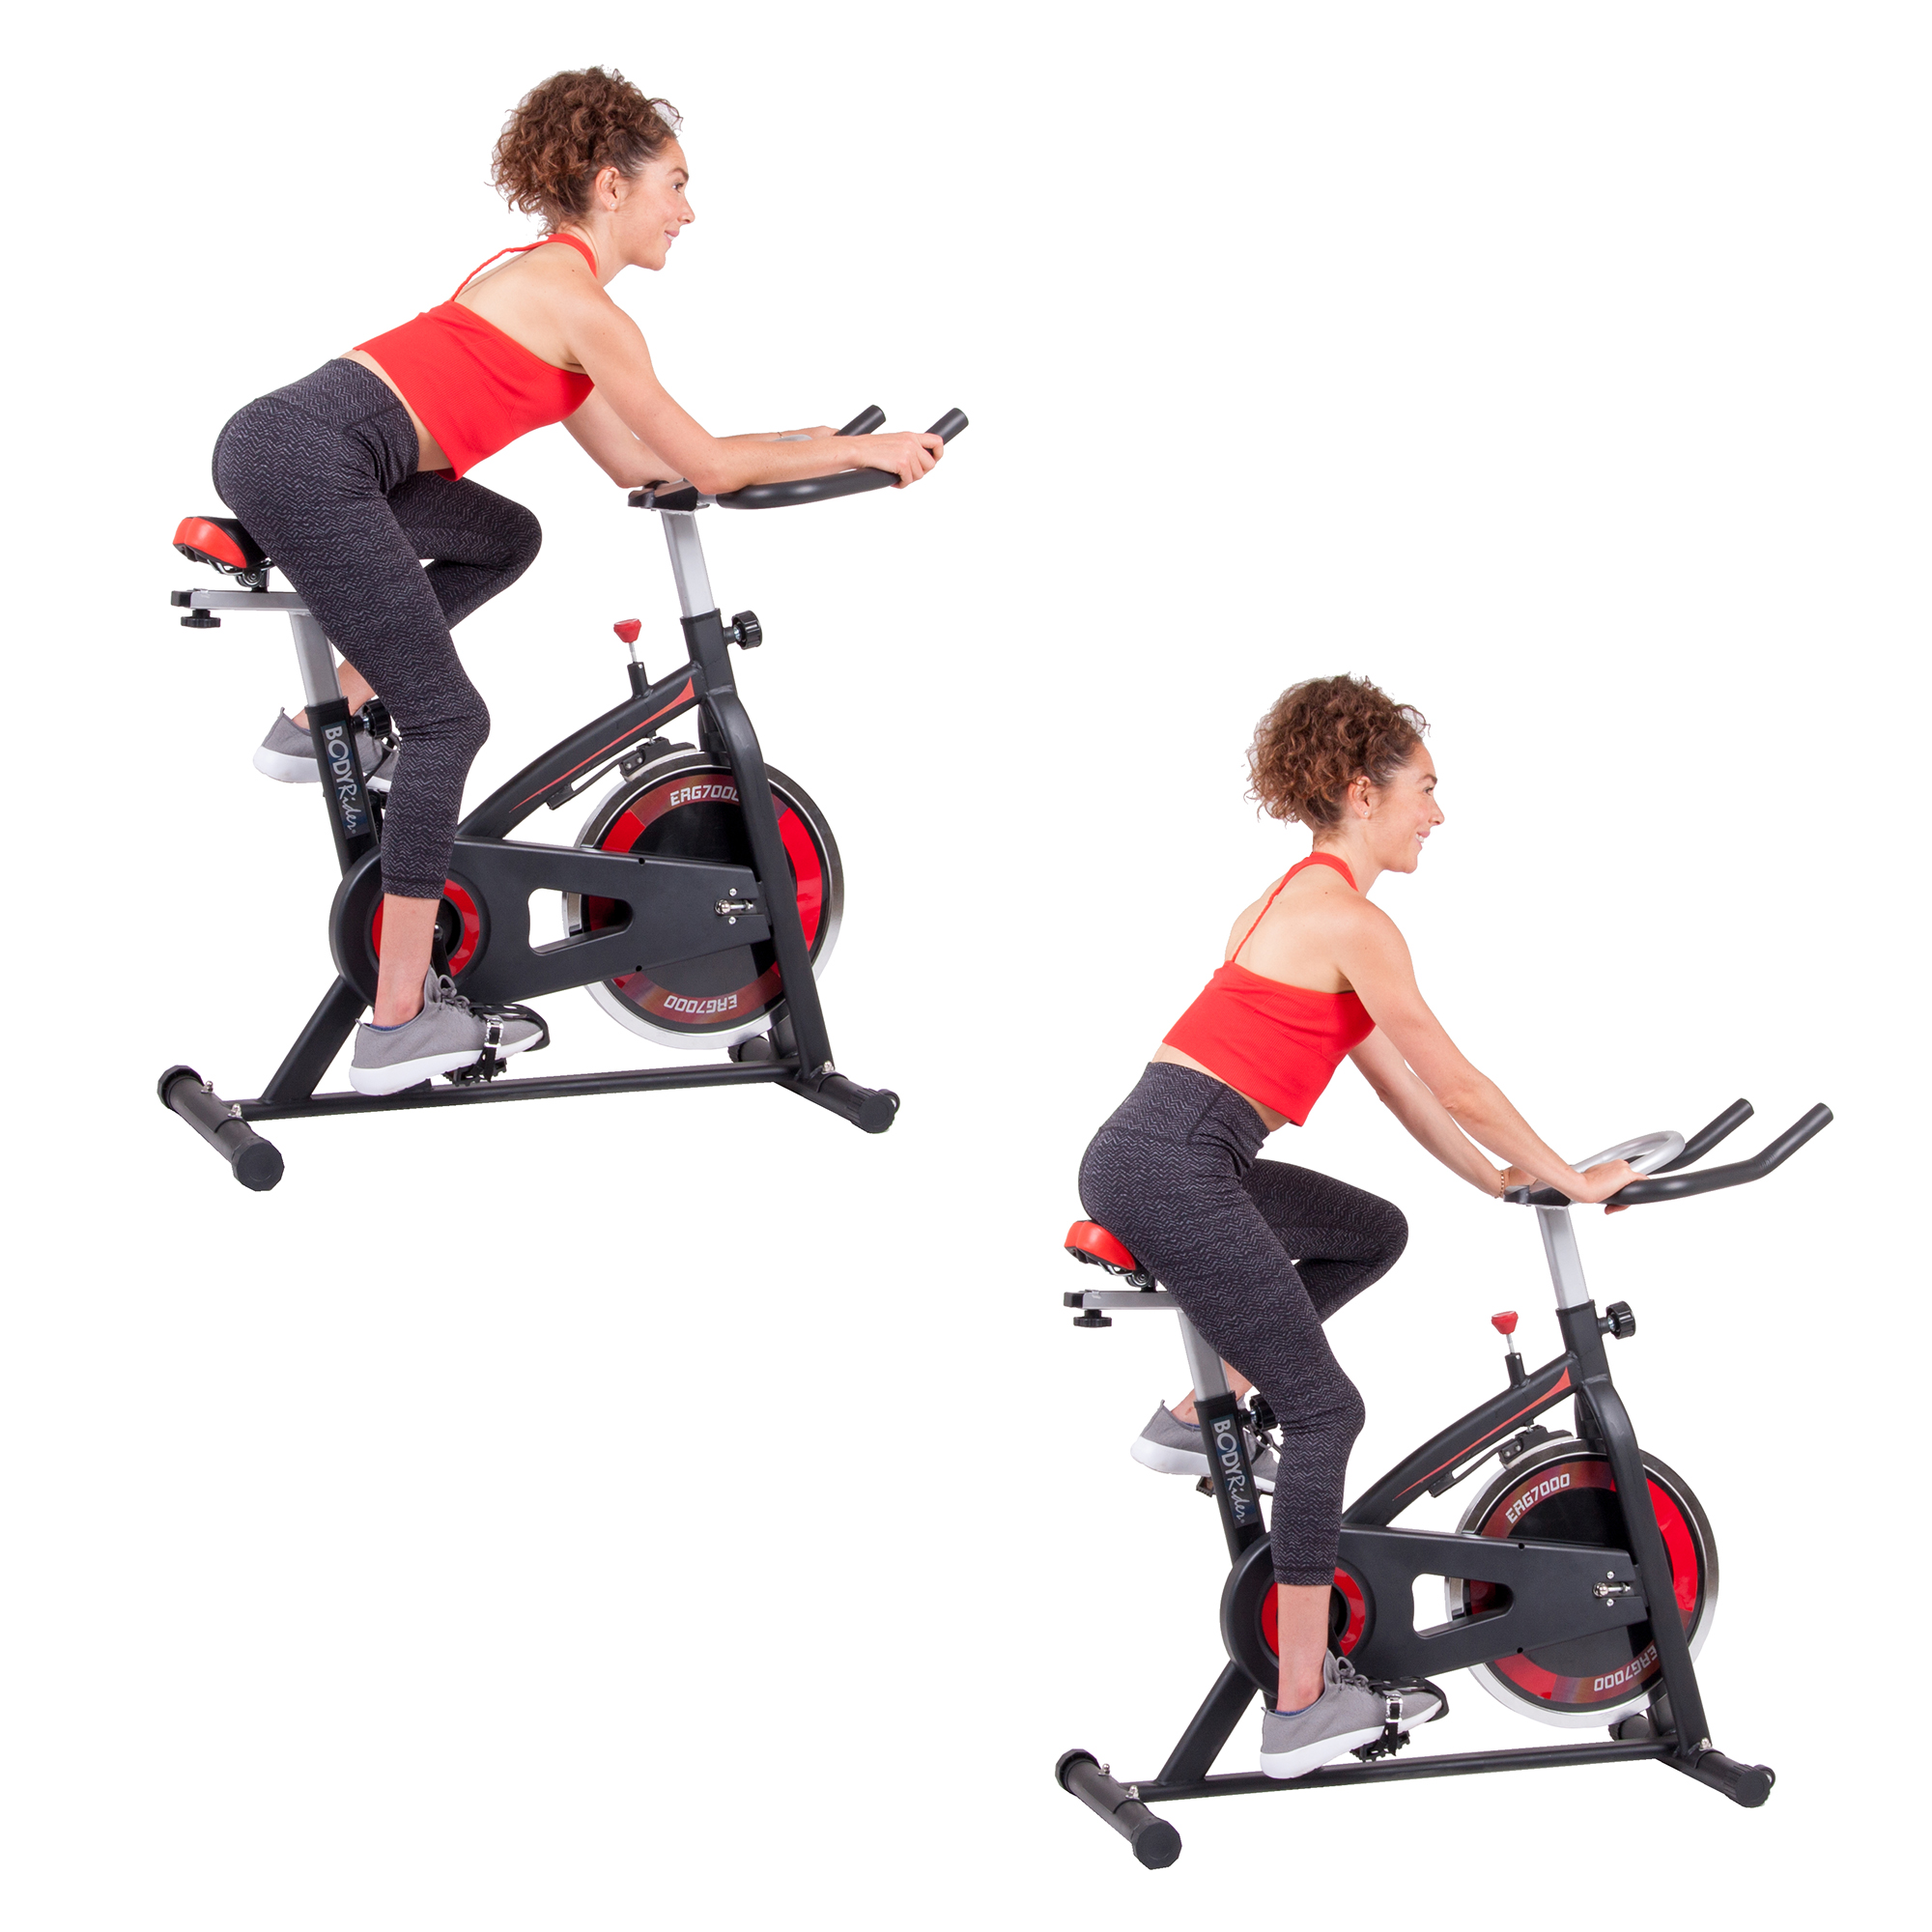 Body Rider ERG7000 PRO Cycling Trainer Stationary Bike, Max. Weight Capacity 250 Lbs. - image 2 of 7